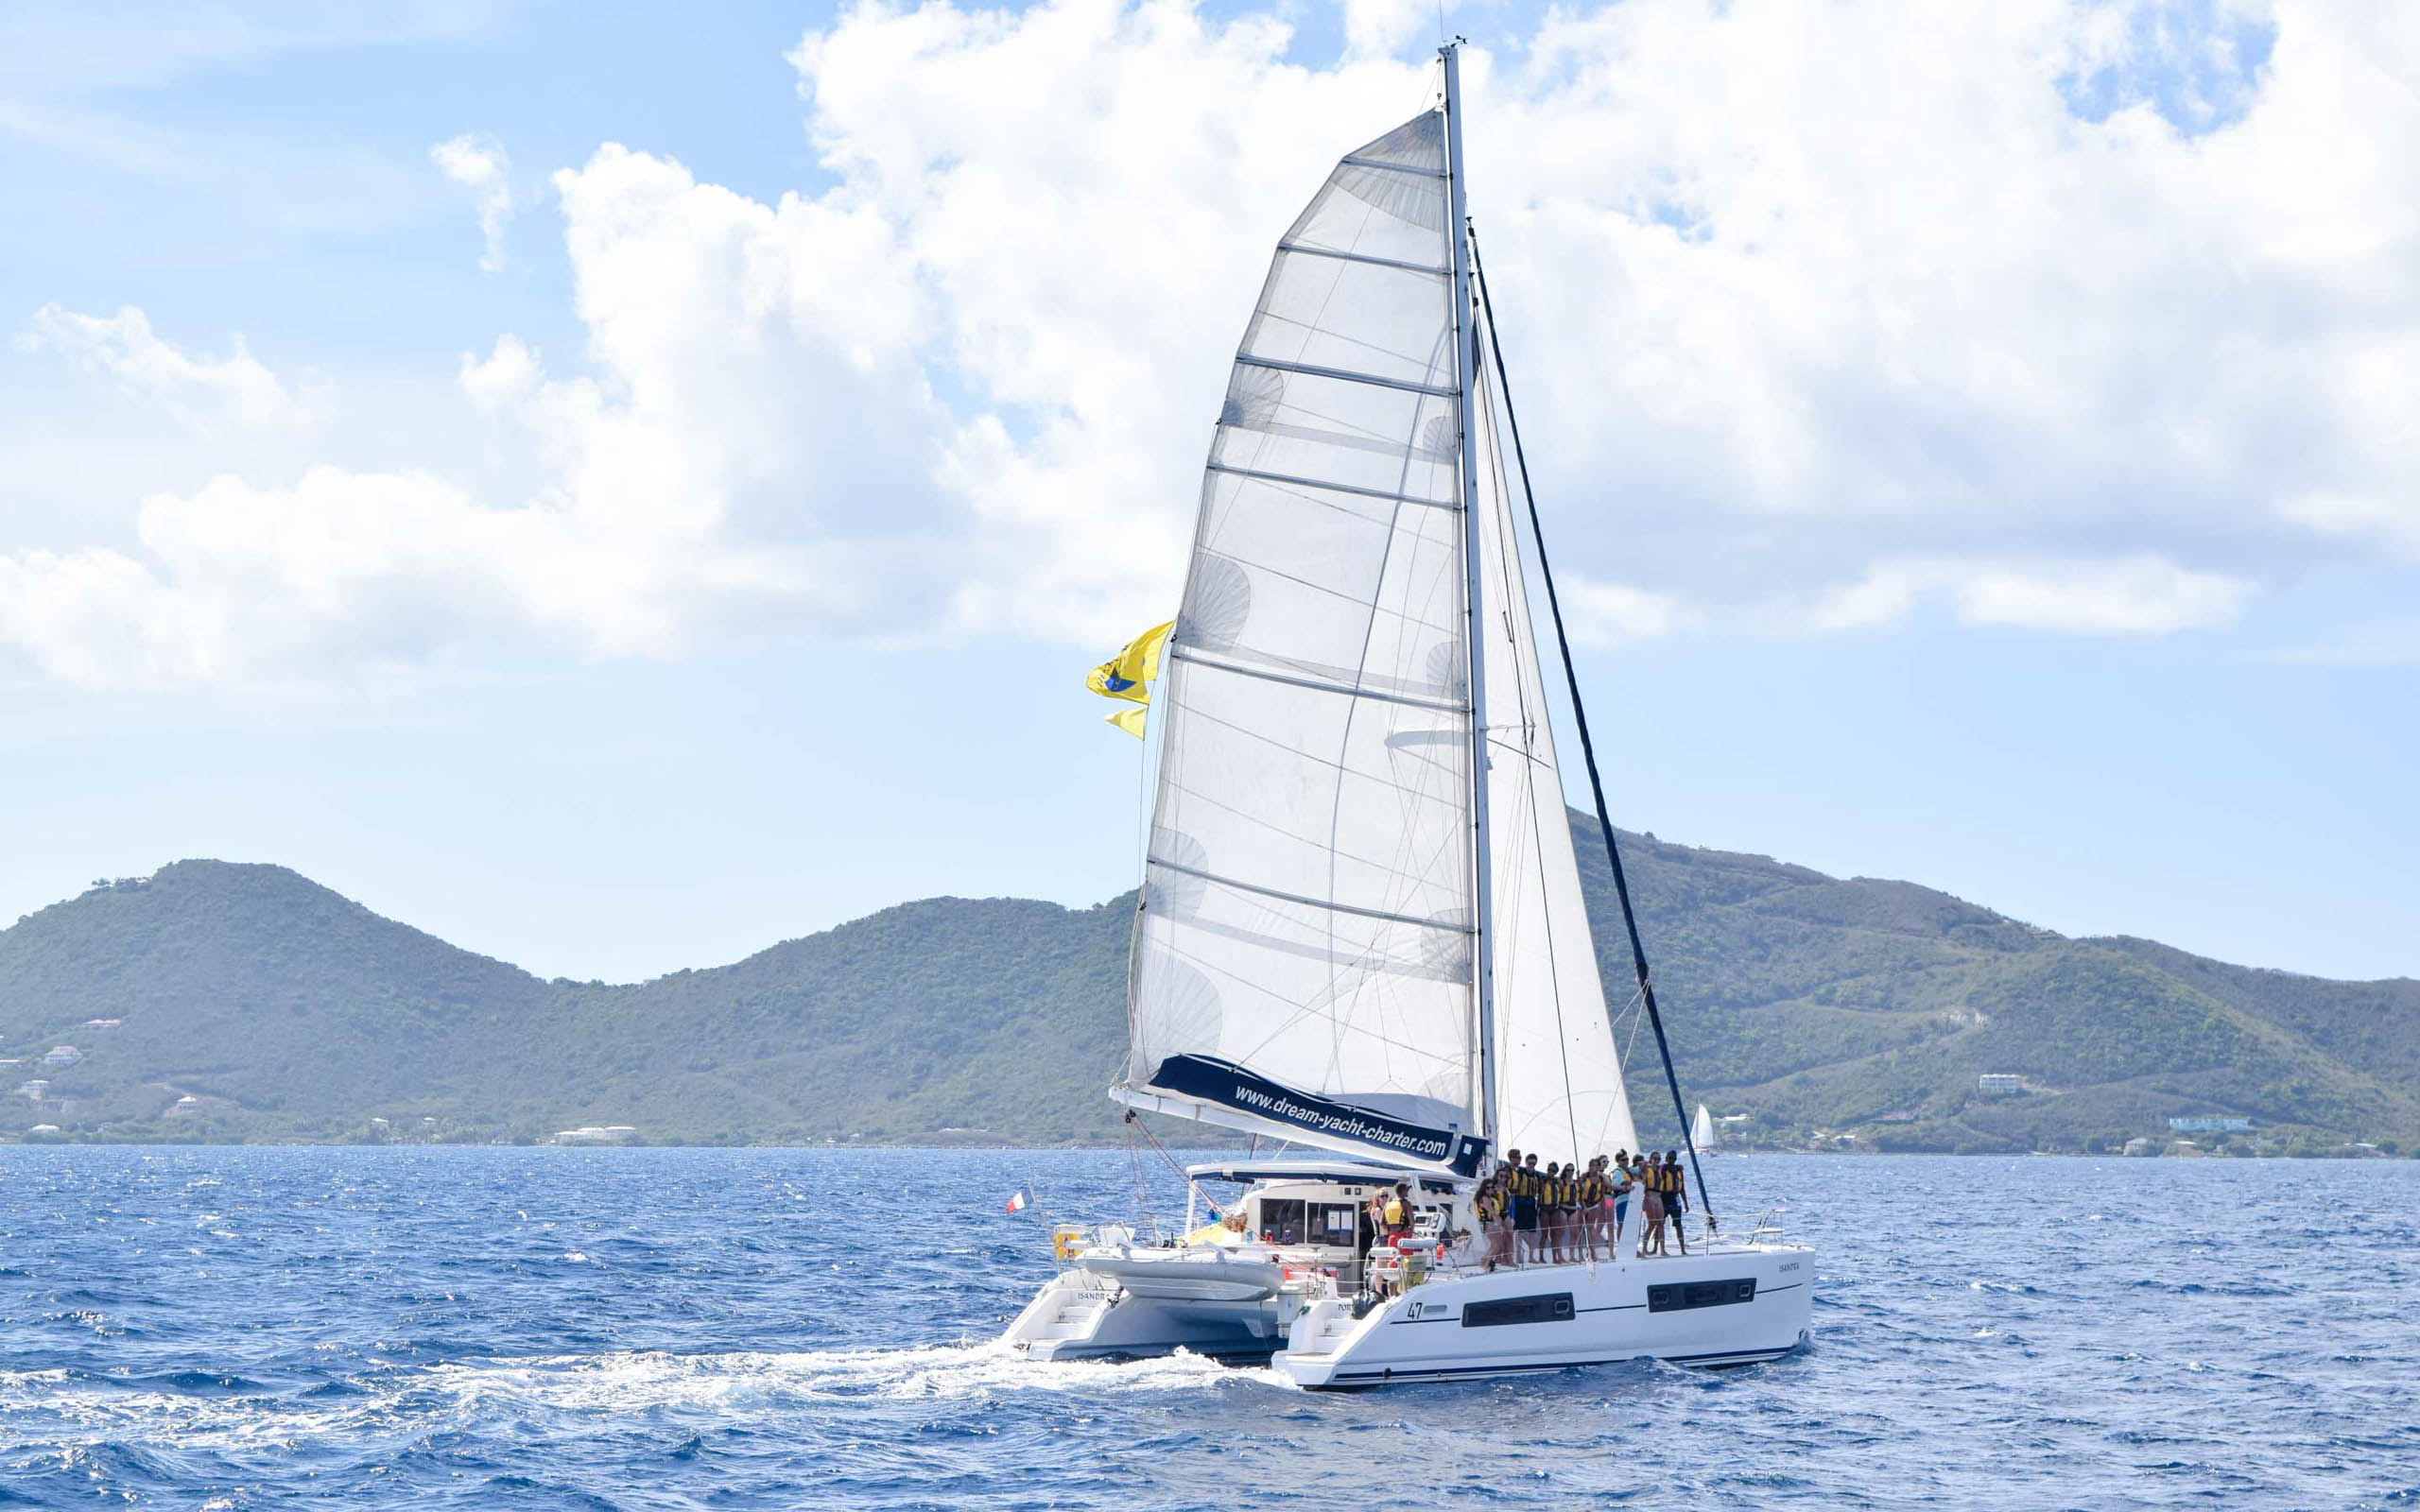 A white catamaran sailing in the ocean with mountains in the background.